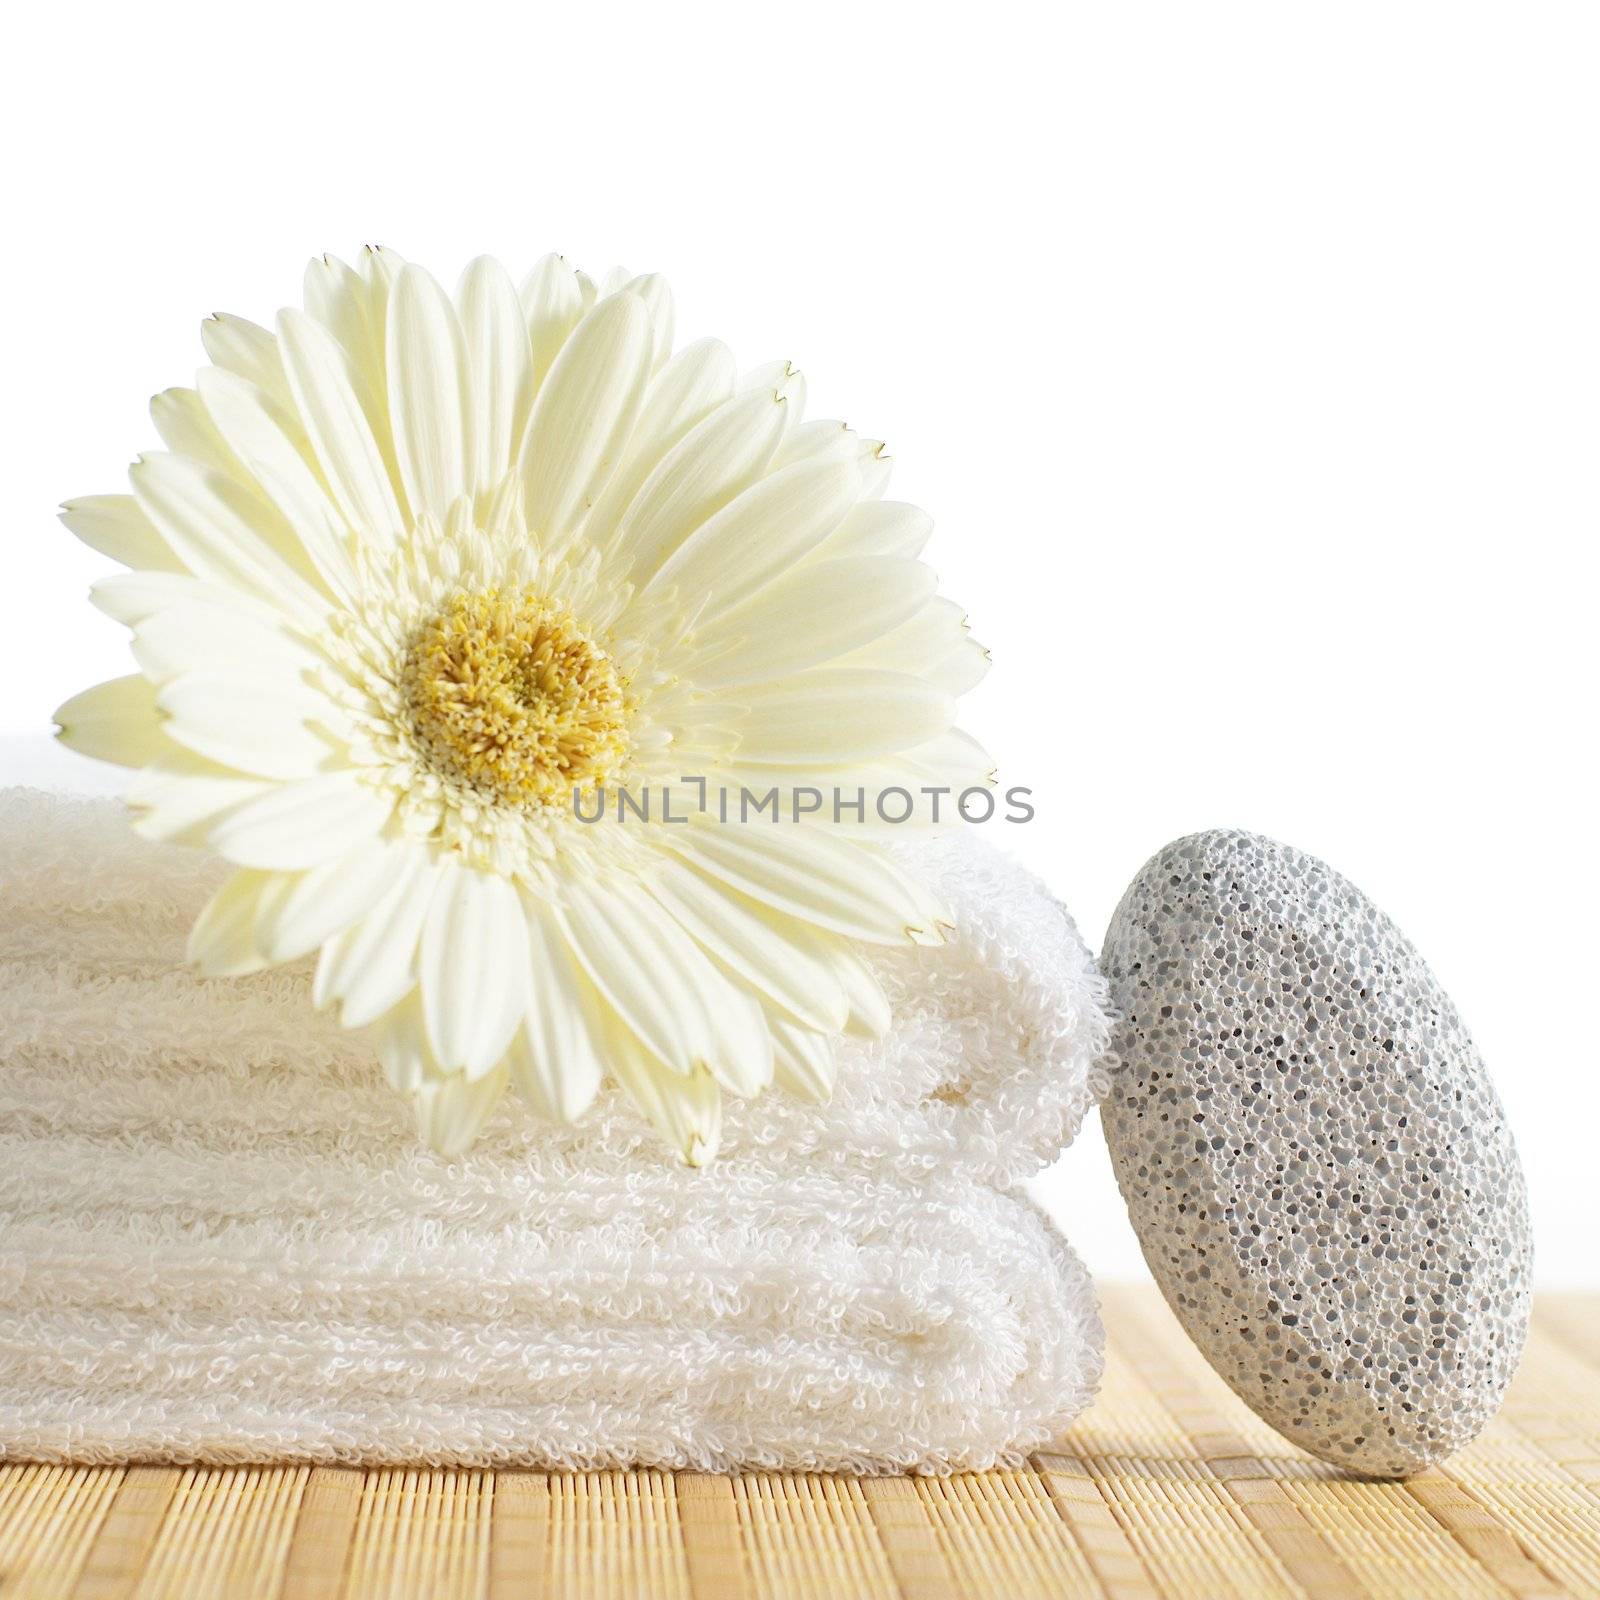 Towels, pumice stone, and flower against a white background.